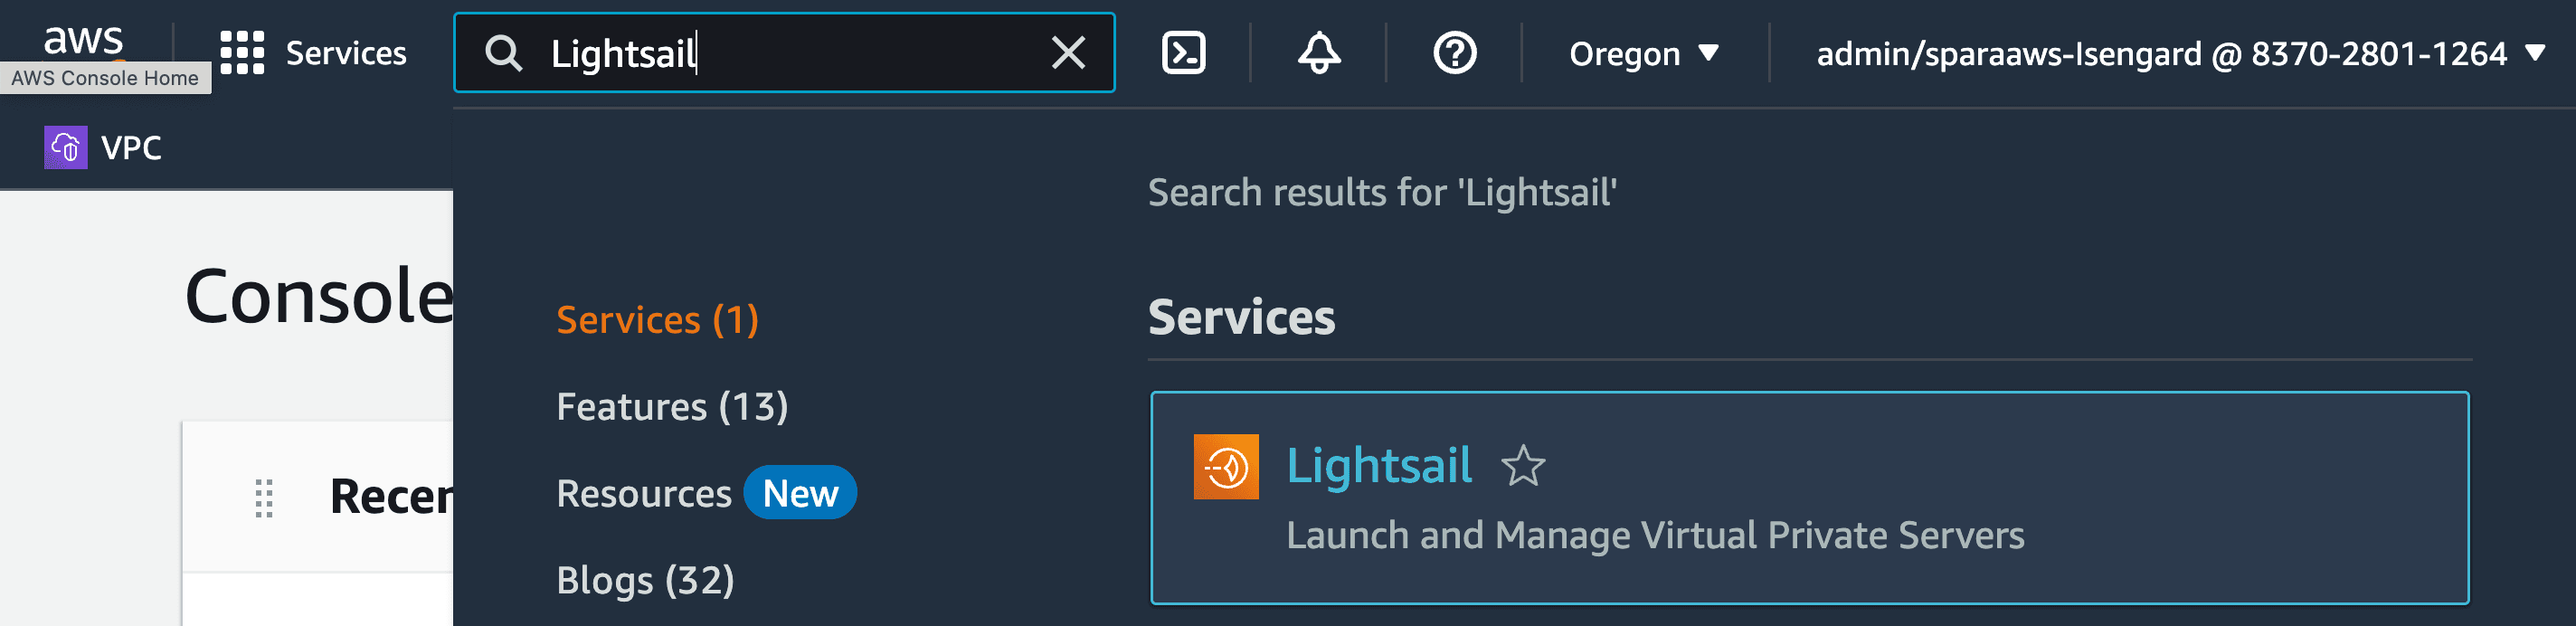 Open AWS Lightsail in console